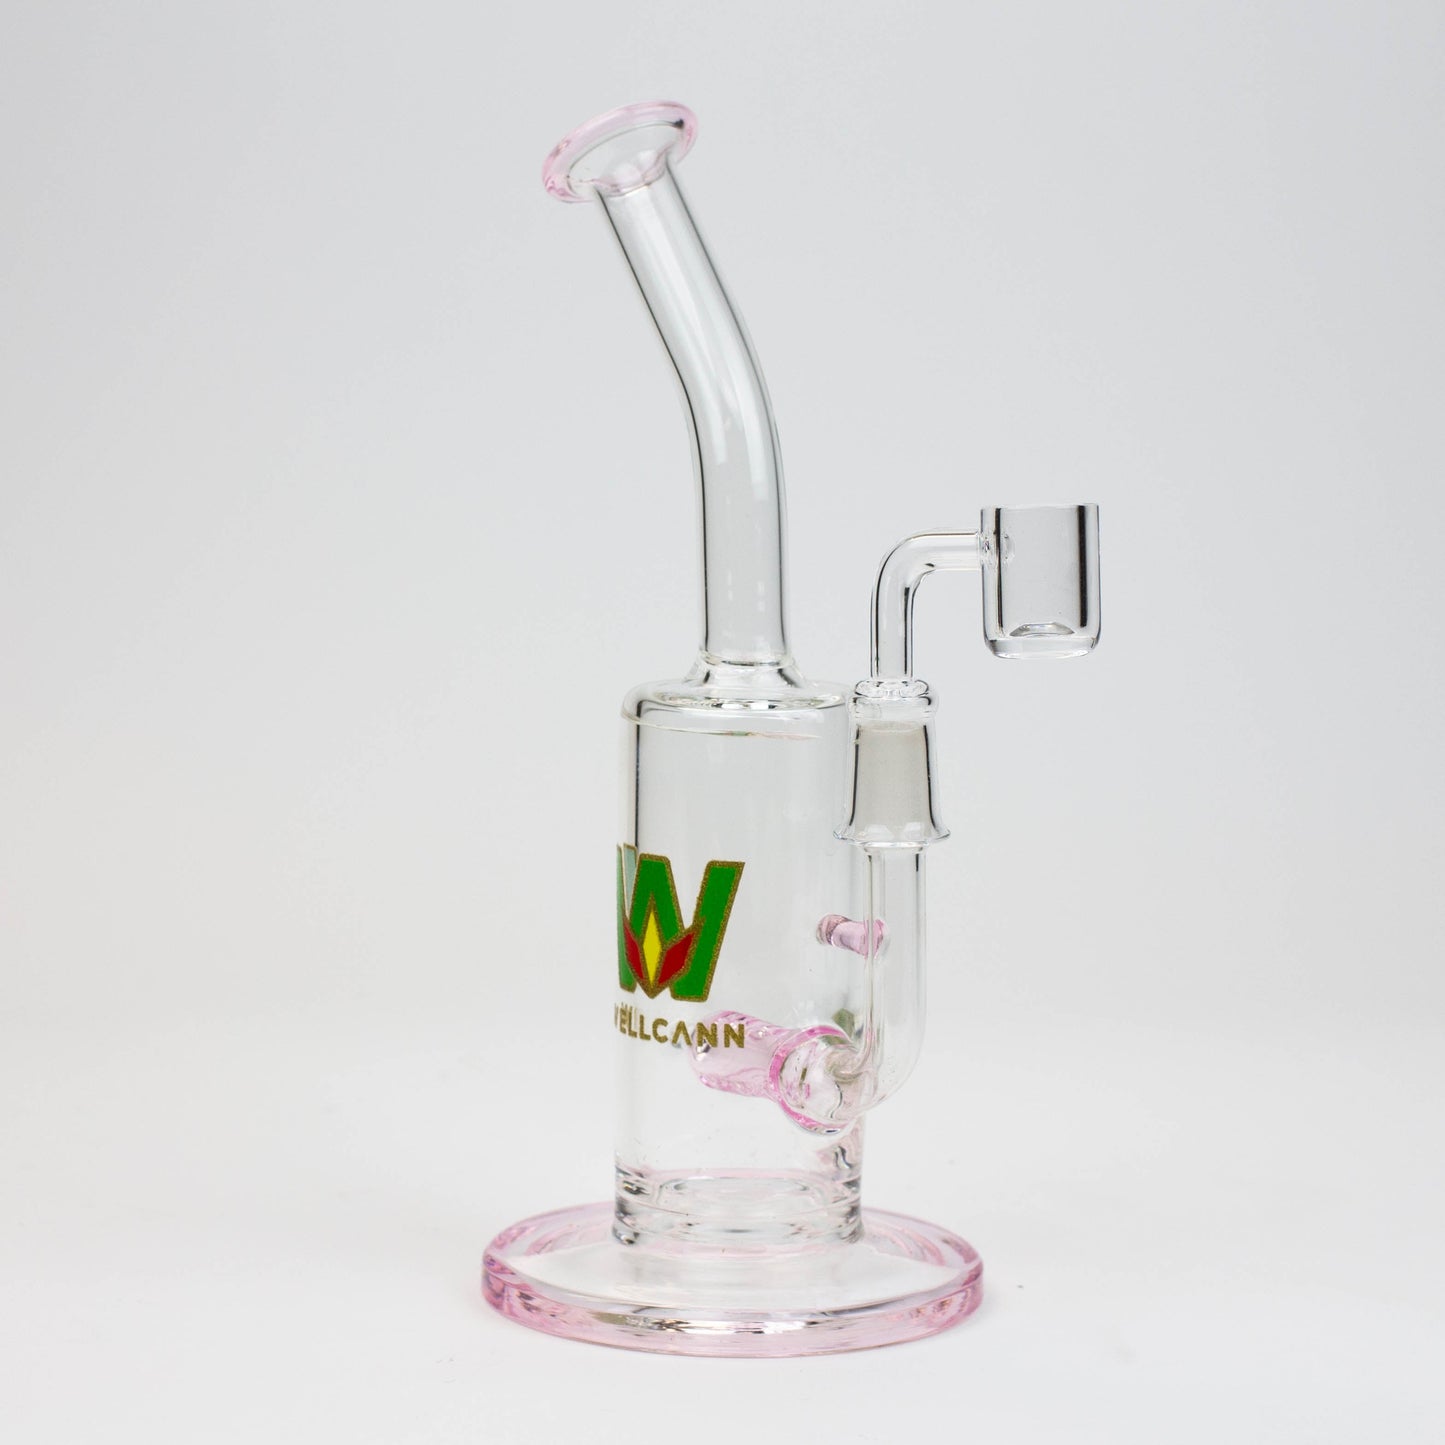 9" WellCann Inline diffuser Rig with Banger_8